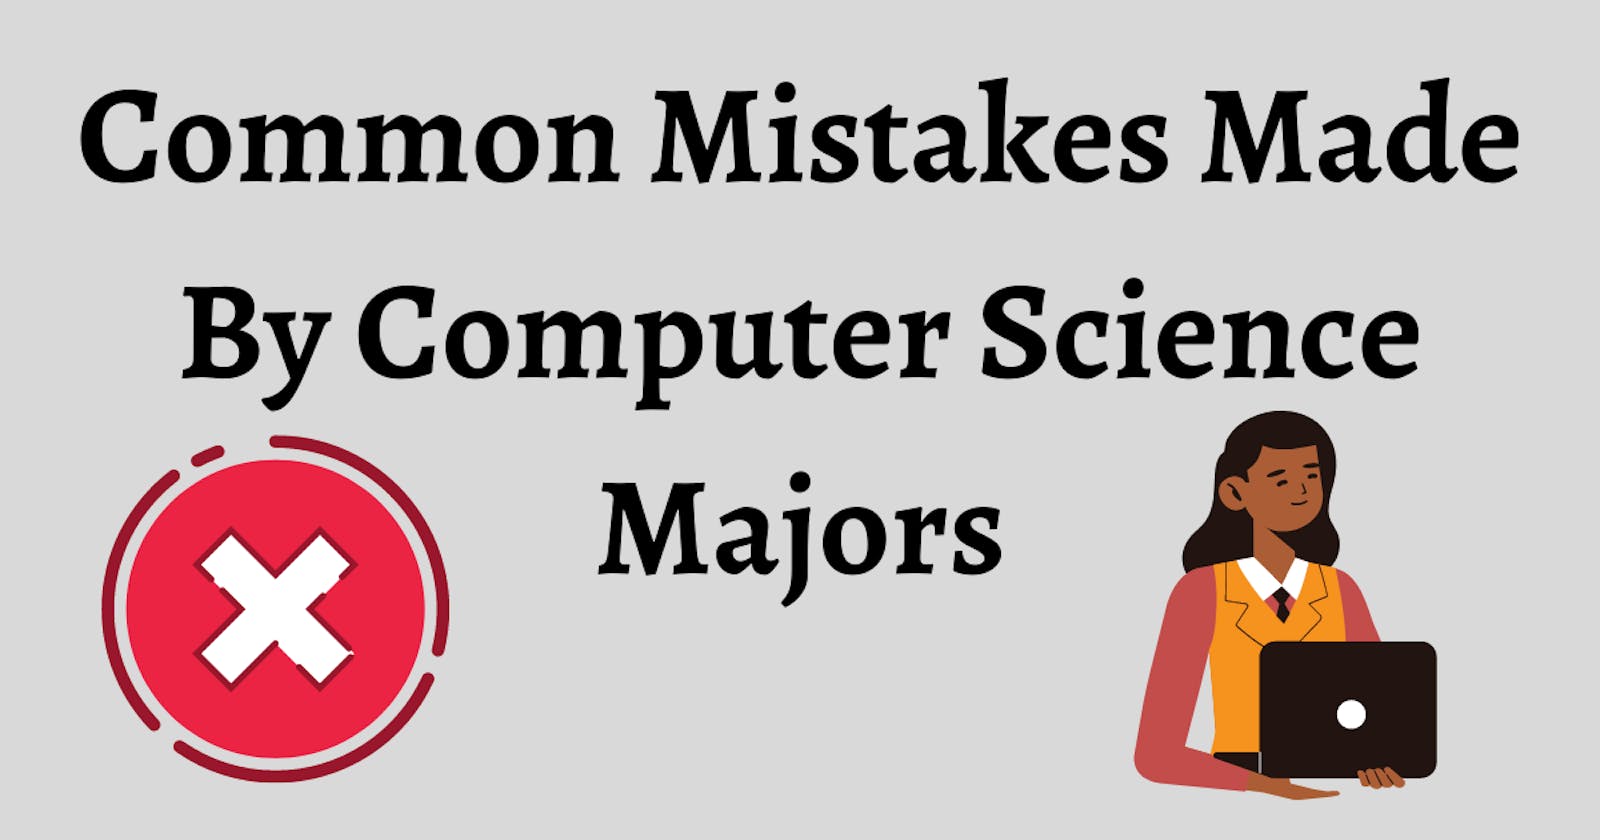 Common Mistakes Made By Computer Science Majors